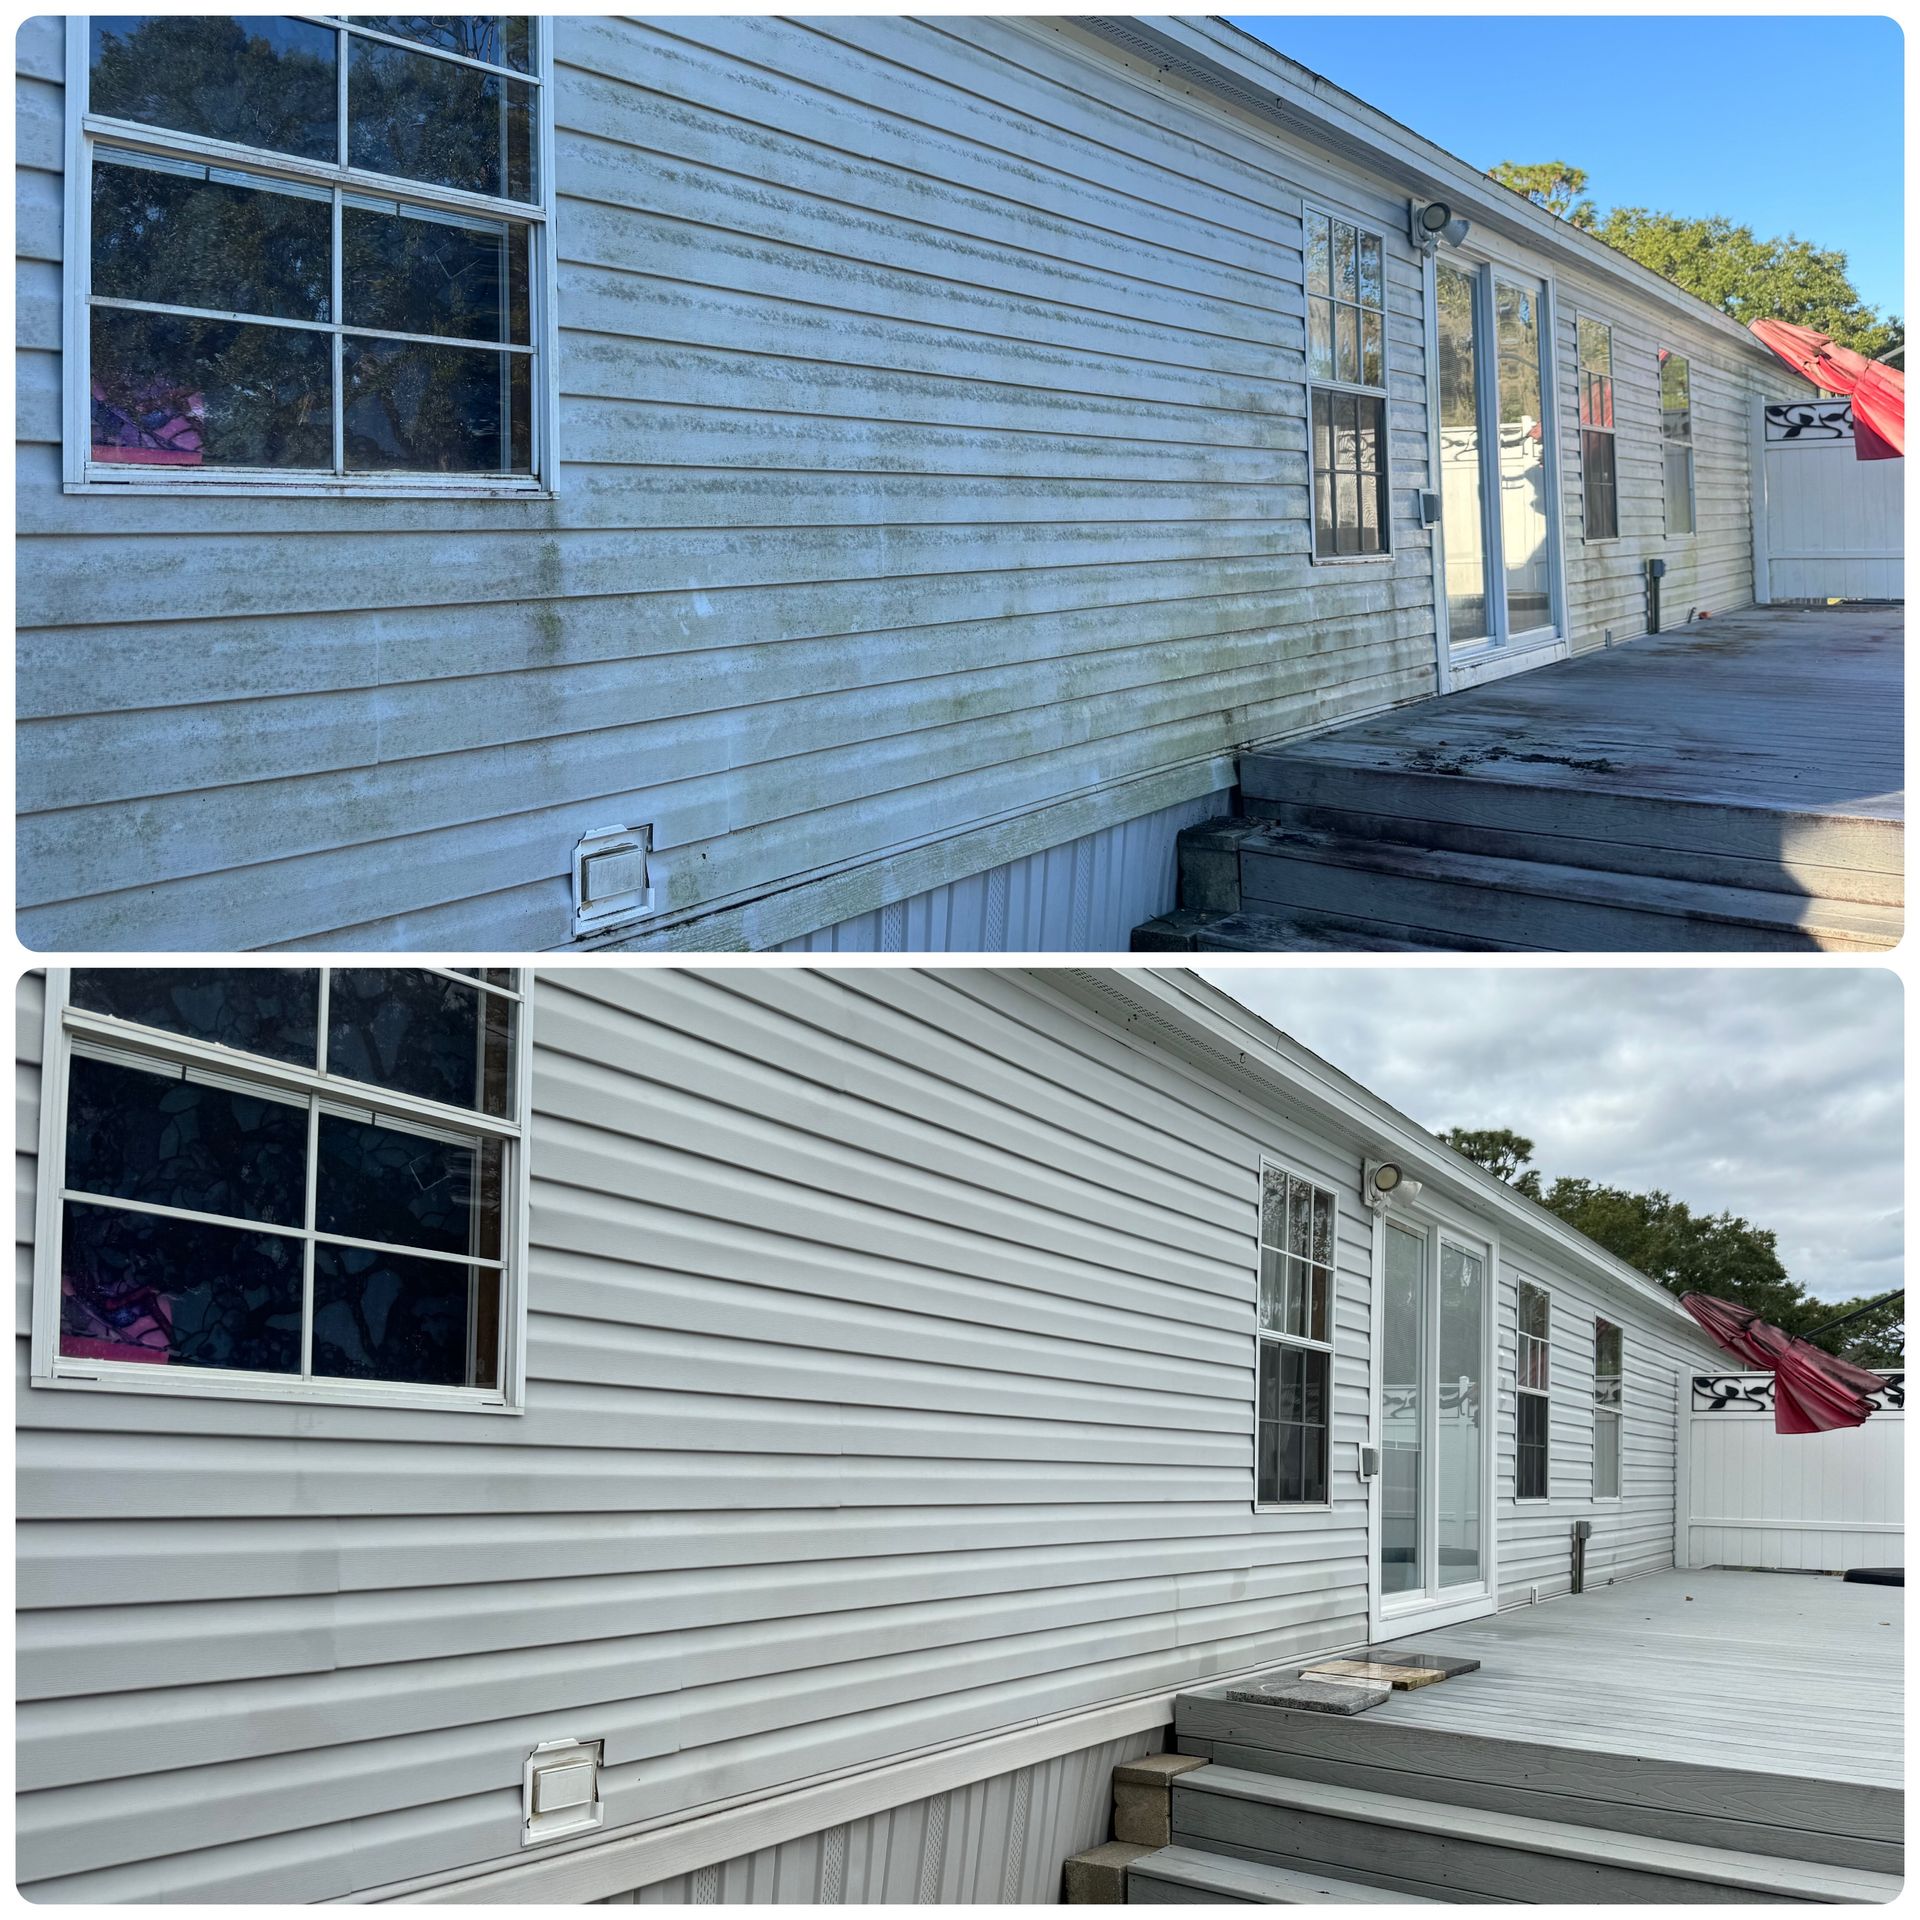 A before and after picture of a mobile home